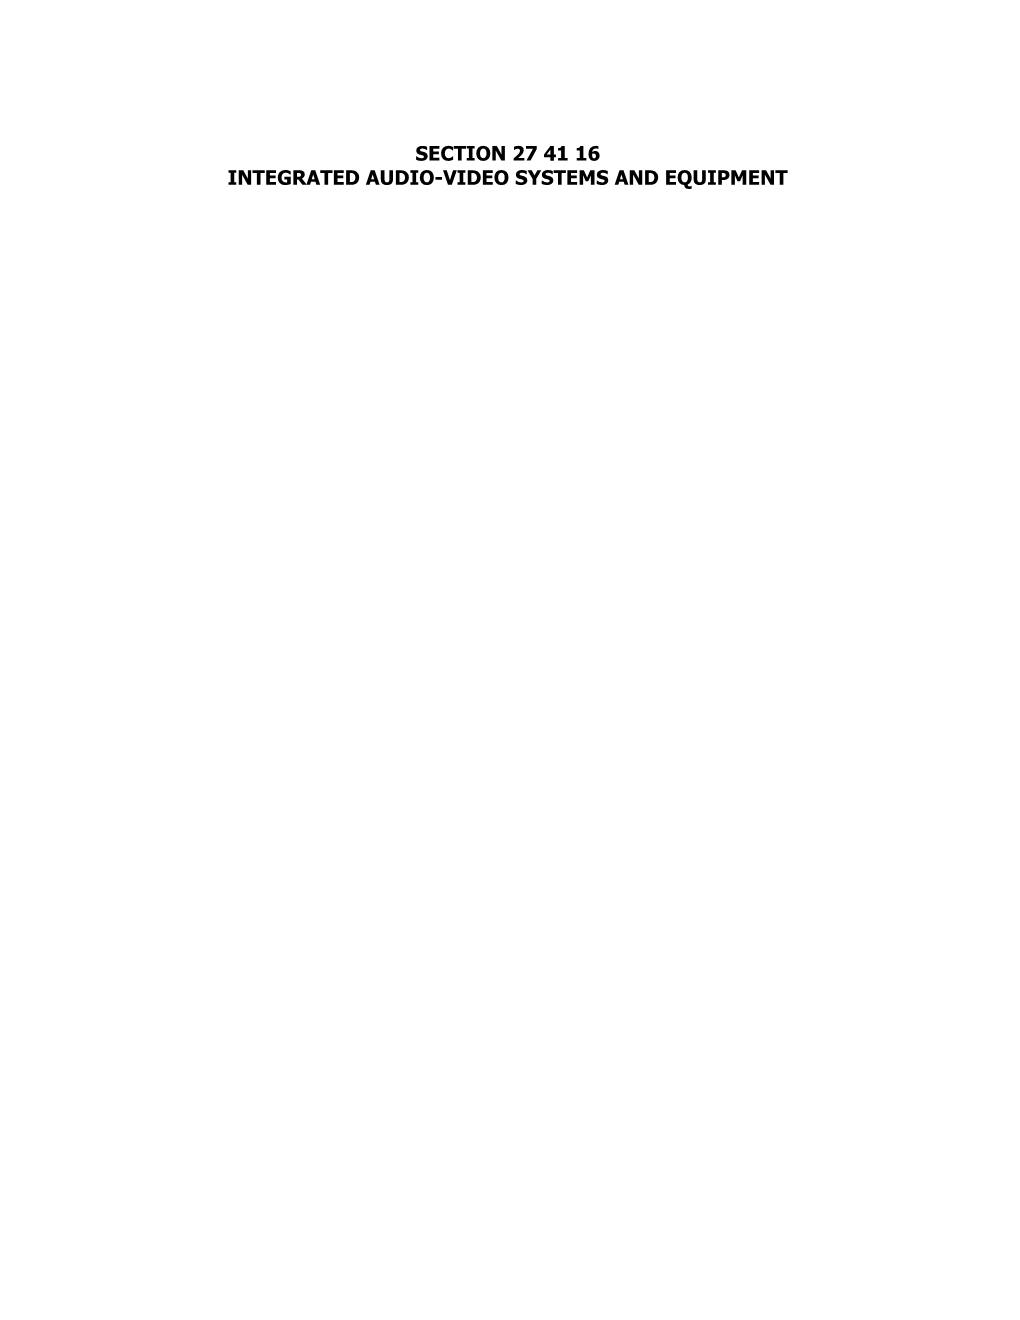 Es 27 41 16 Integrated Audio-Video Systems and Equipment